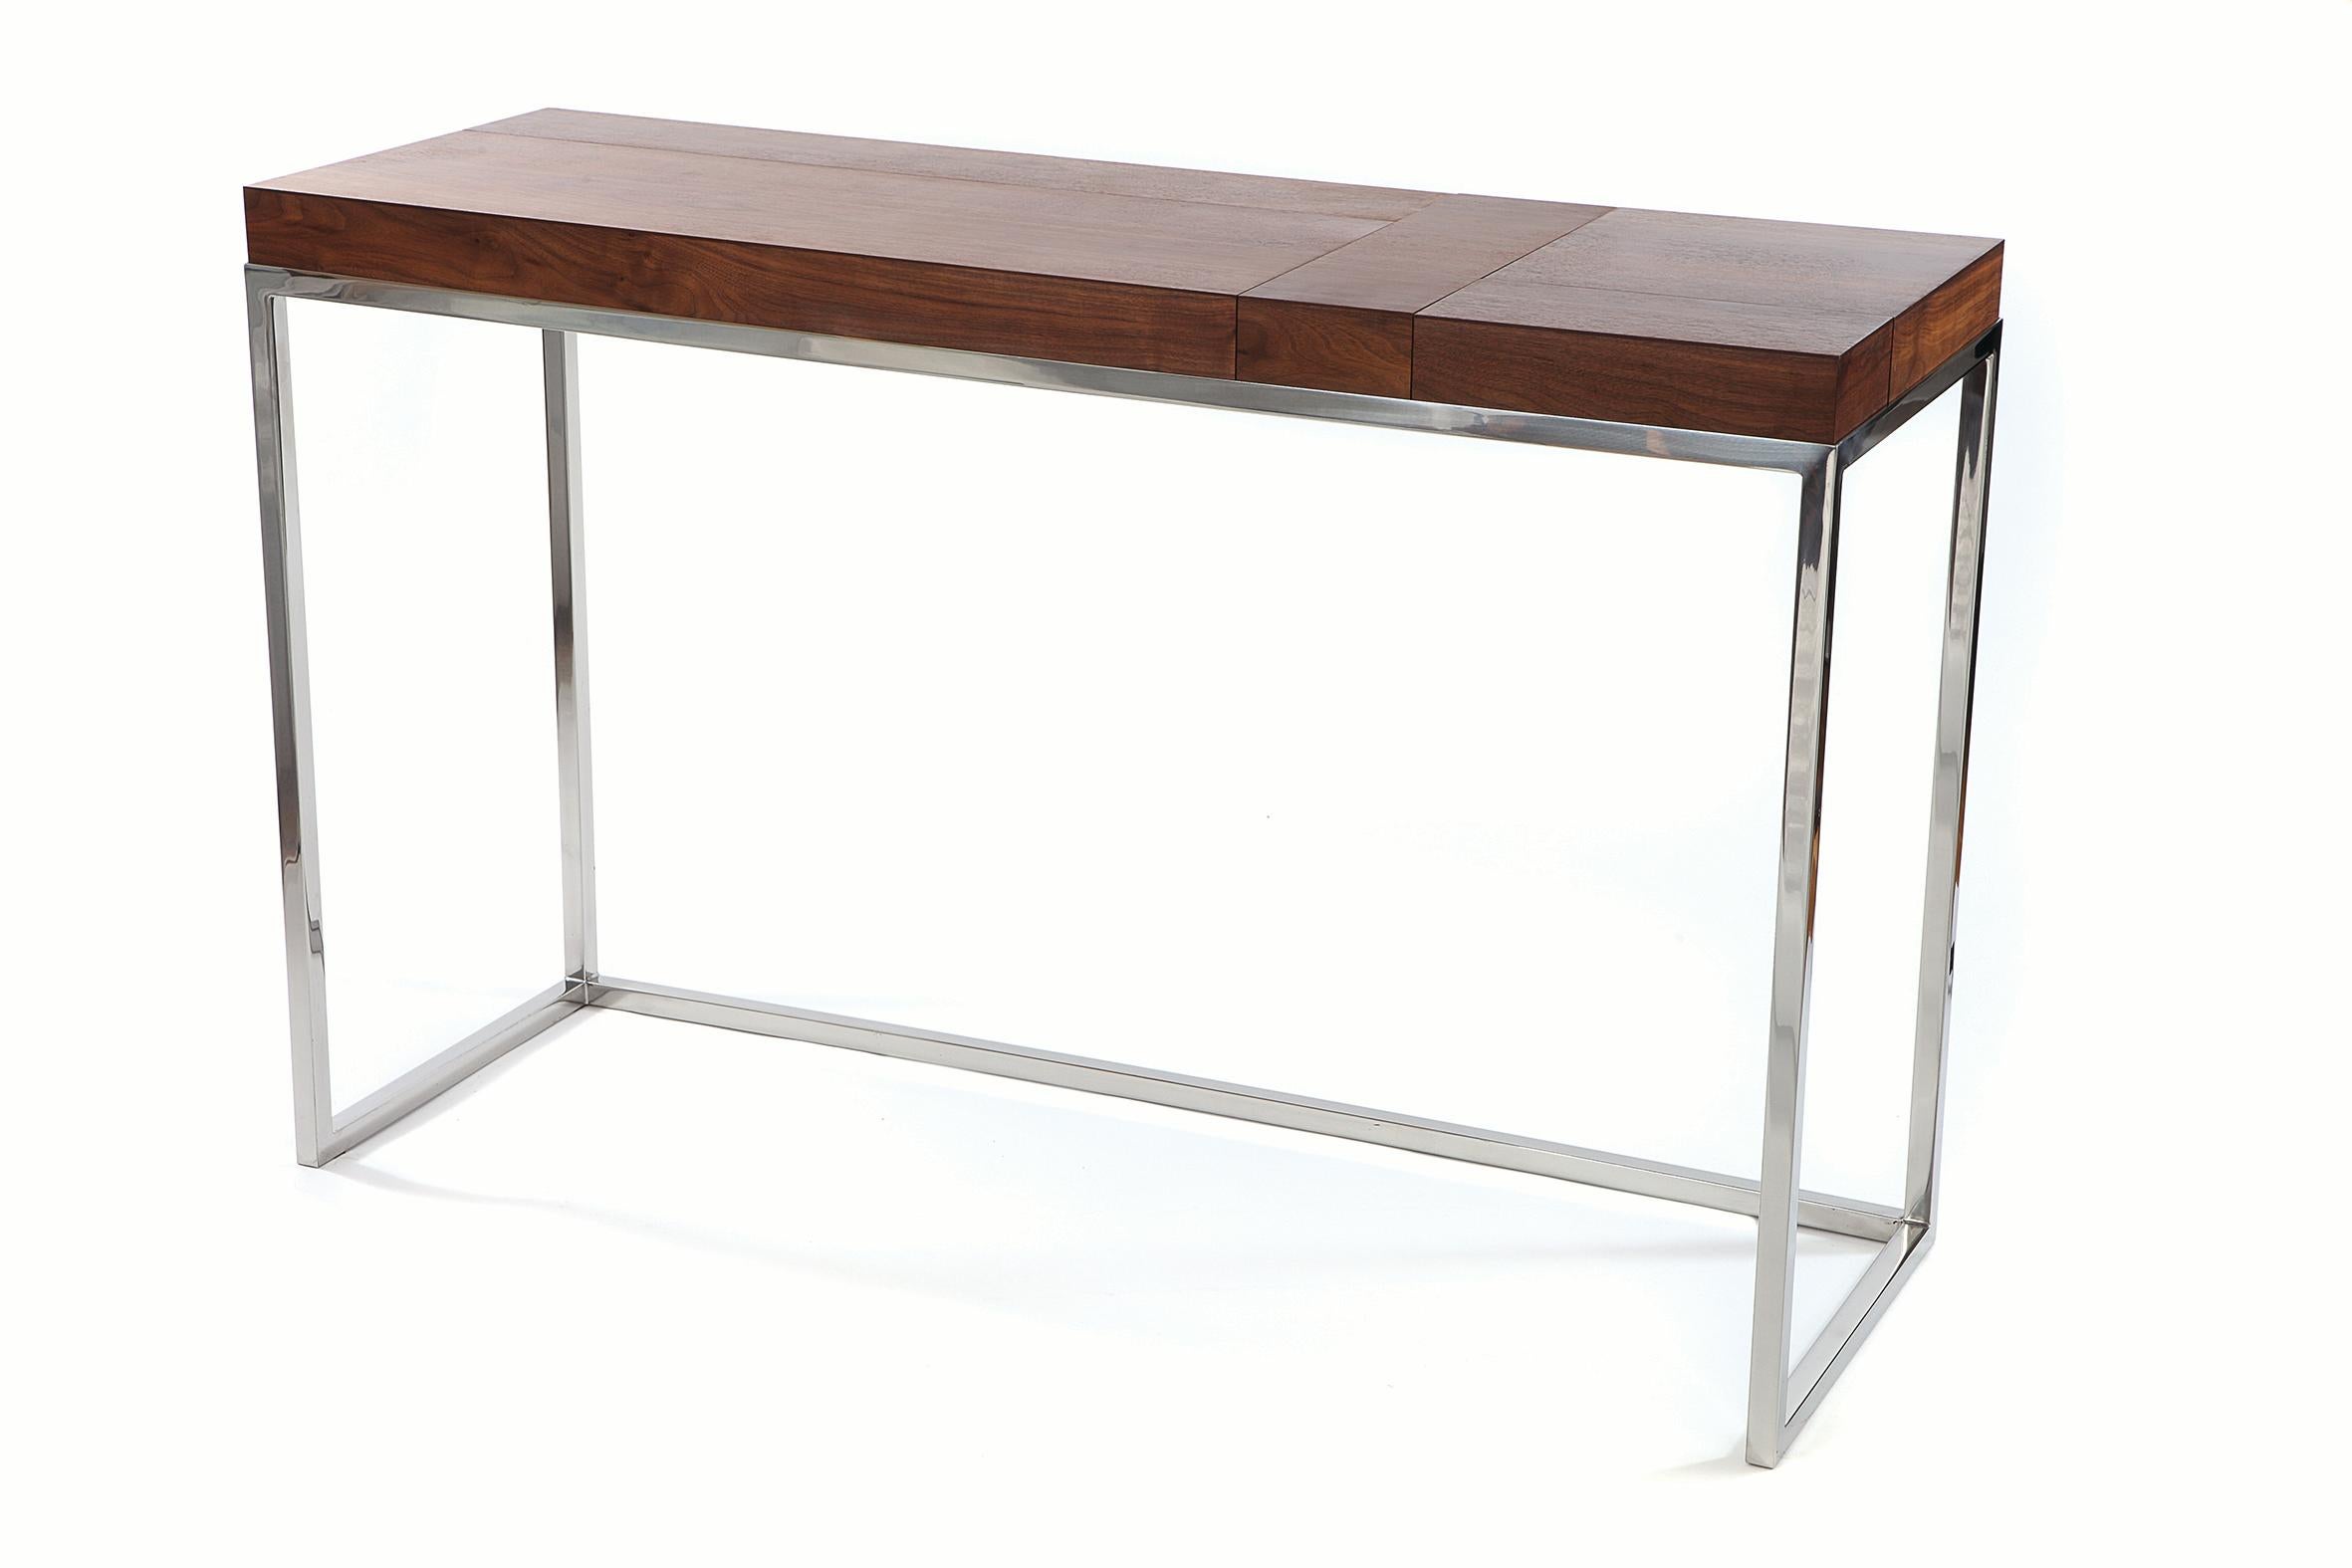 The Greta console consists of five trays; beautifully crafted from American walnut and set within a polished stainless-steel frame. Its 2” deep trays are ideal for the storage and display of personal belongings and accessories, such as jewelry, a